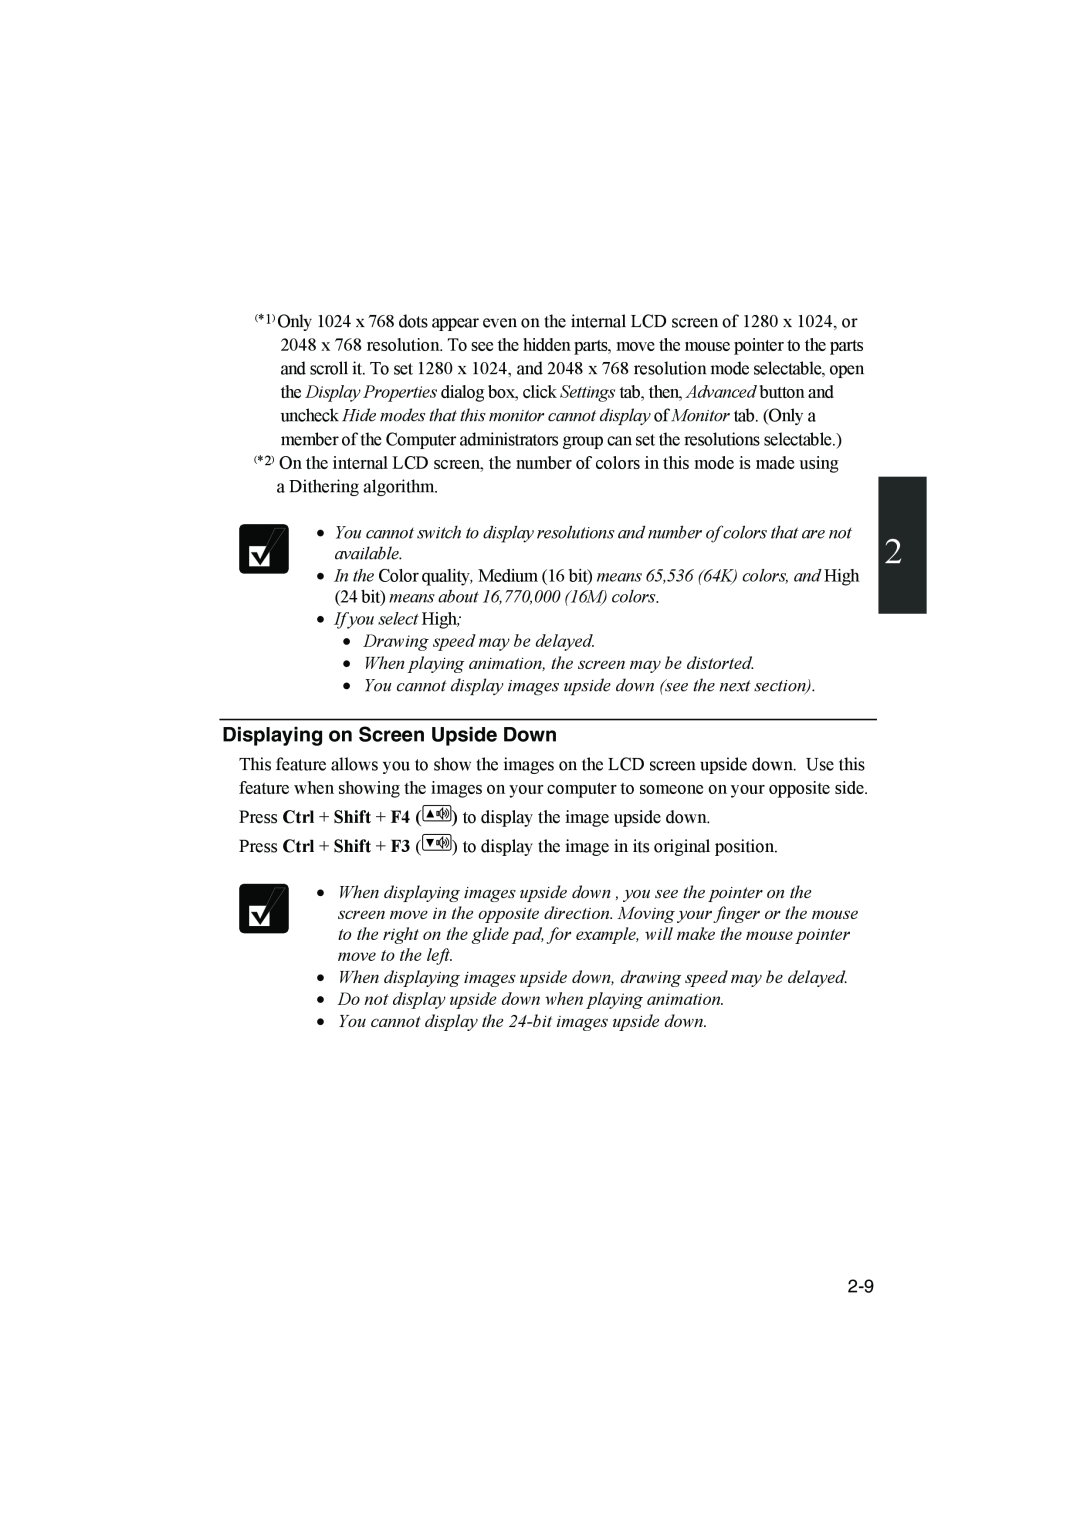 Sharp PC-MM1 manual Displaying on Screen Upside Down, a Dithering algorithm 